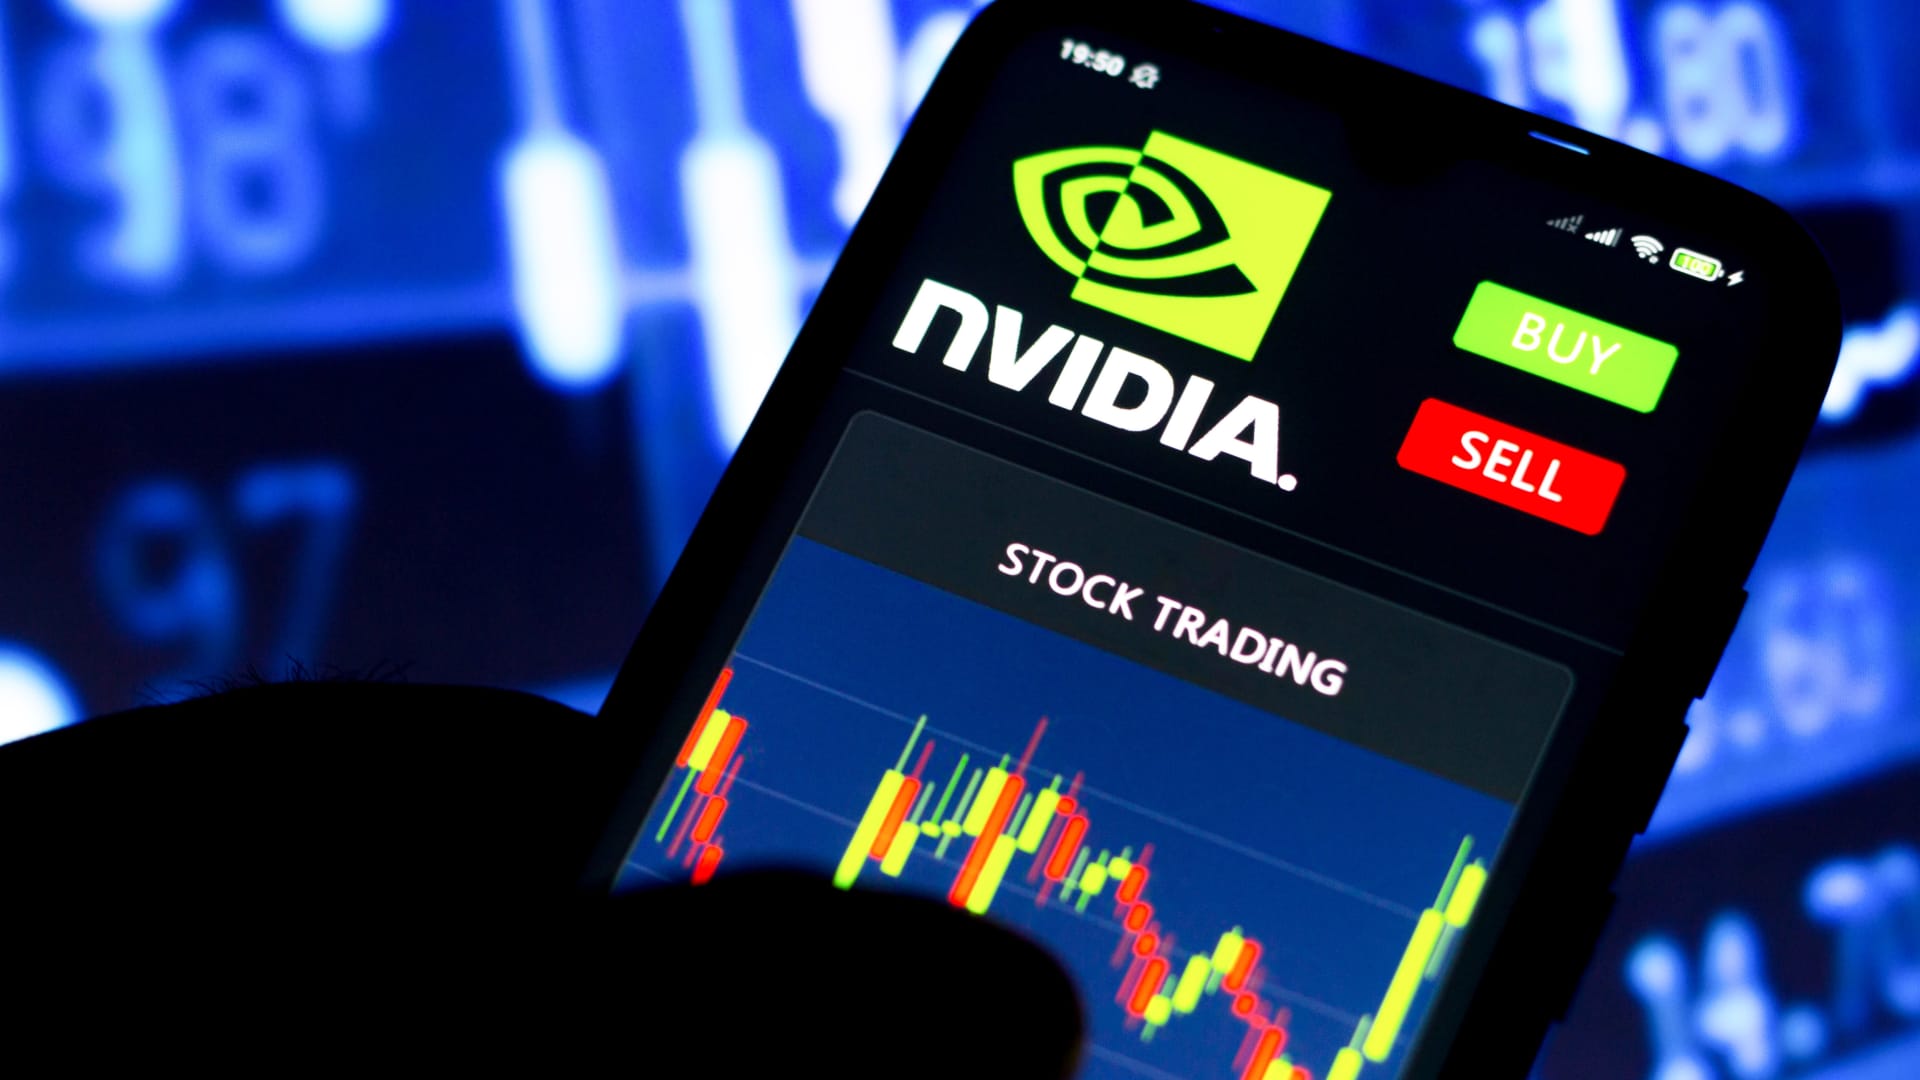 Nvidia rally is fueling FOMO in the overall market, Evercore's Julian Emanuel warns